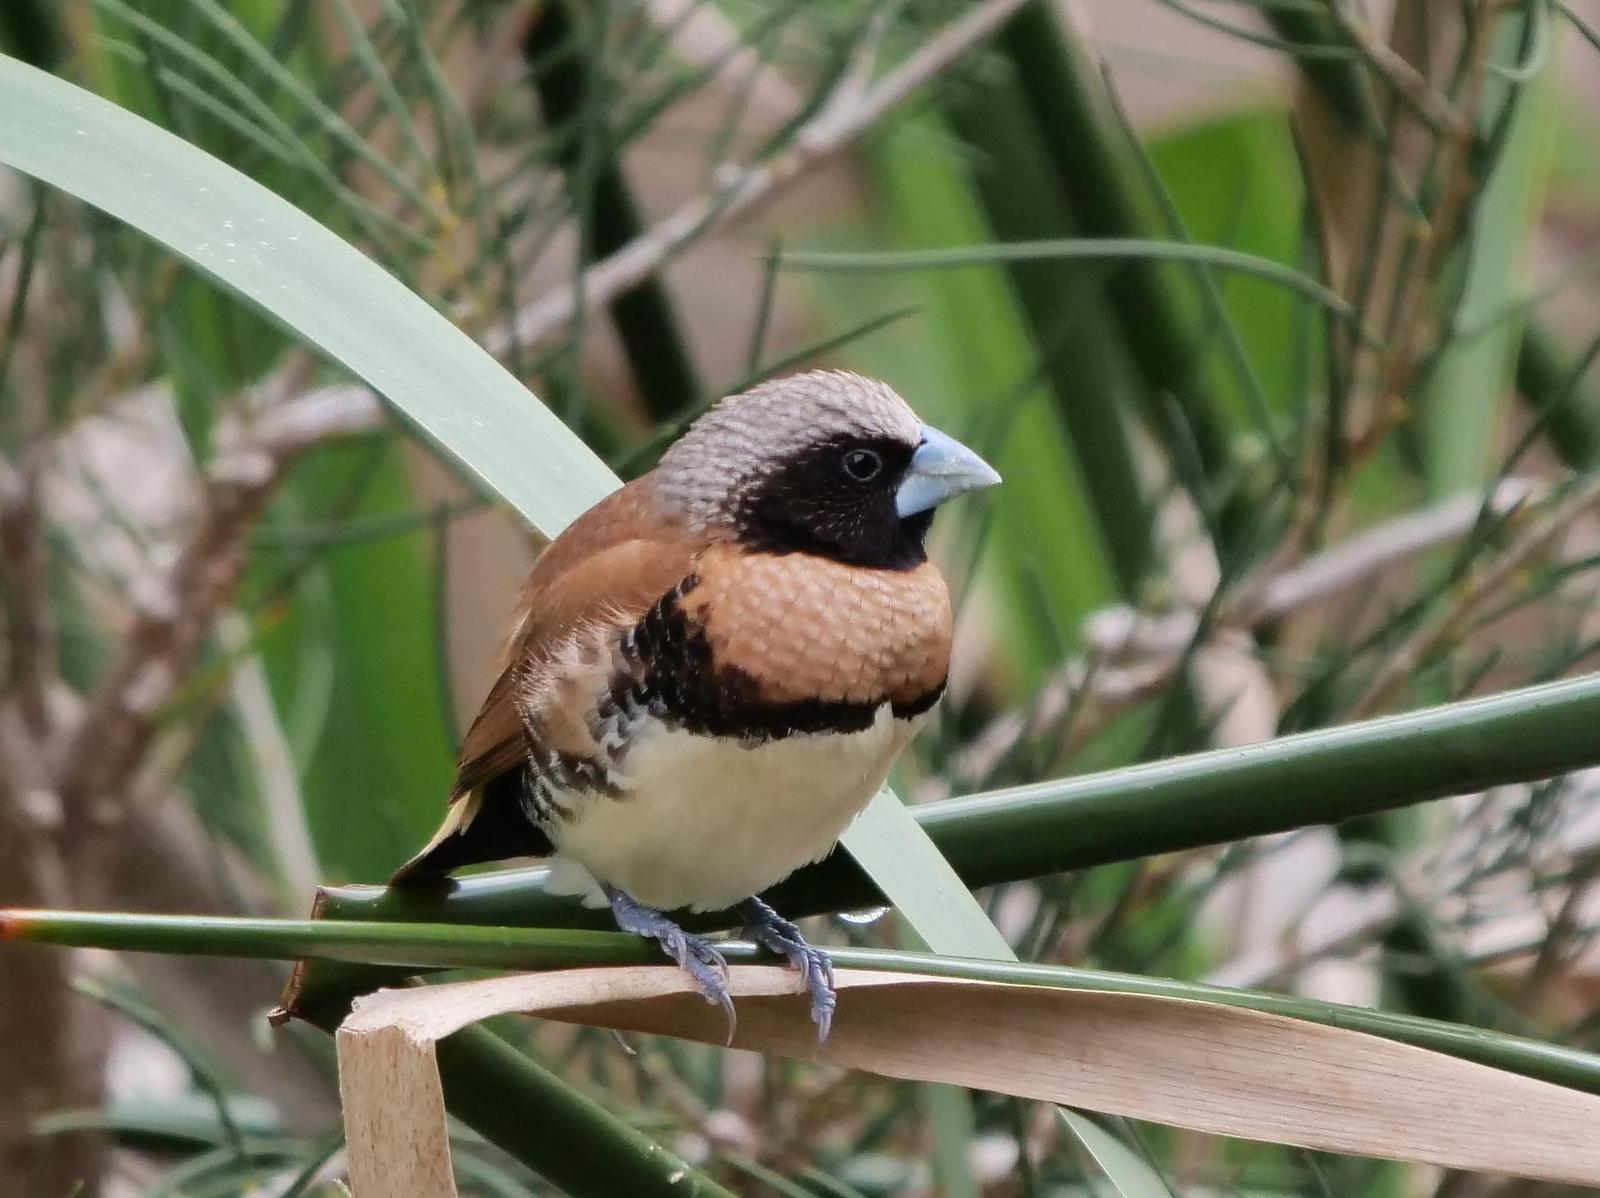 Chestnut-breasted Munia Photo by Peter Lowe